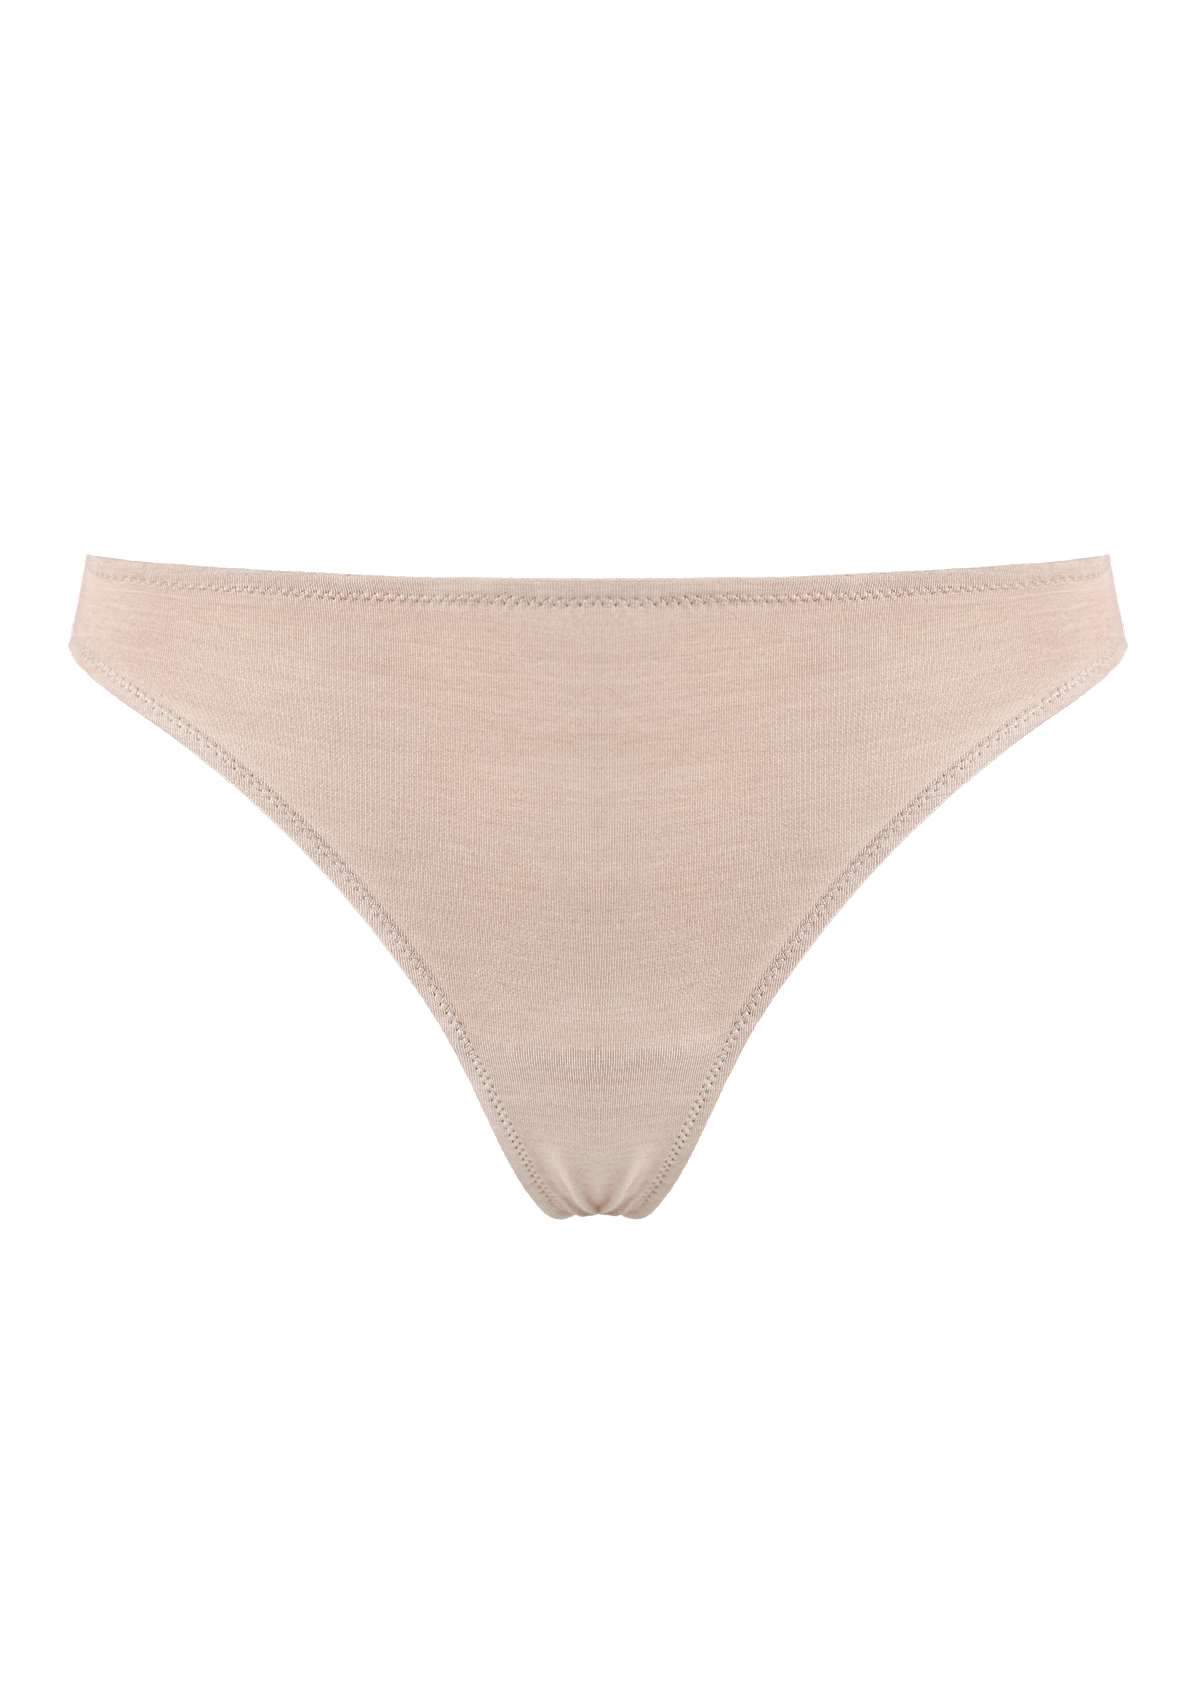 HSIA Comfort Cotton Thongs 3 Pack - S / Beige+Black+Pink